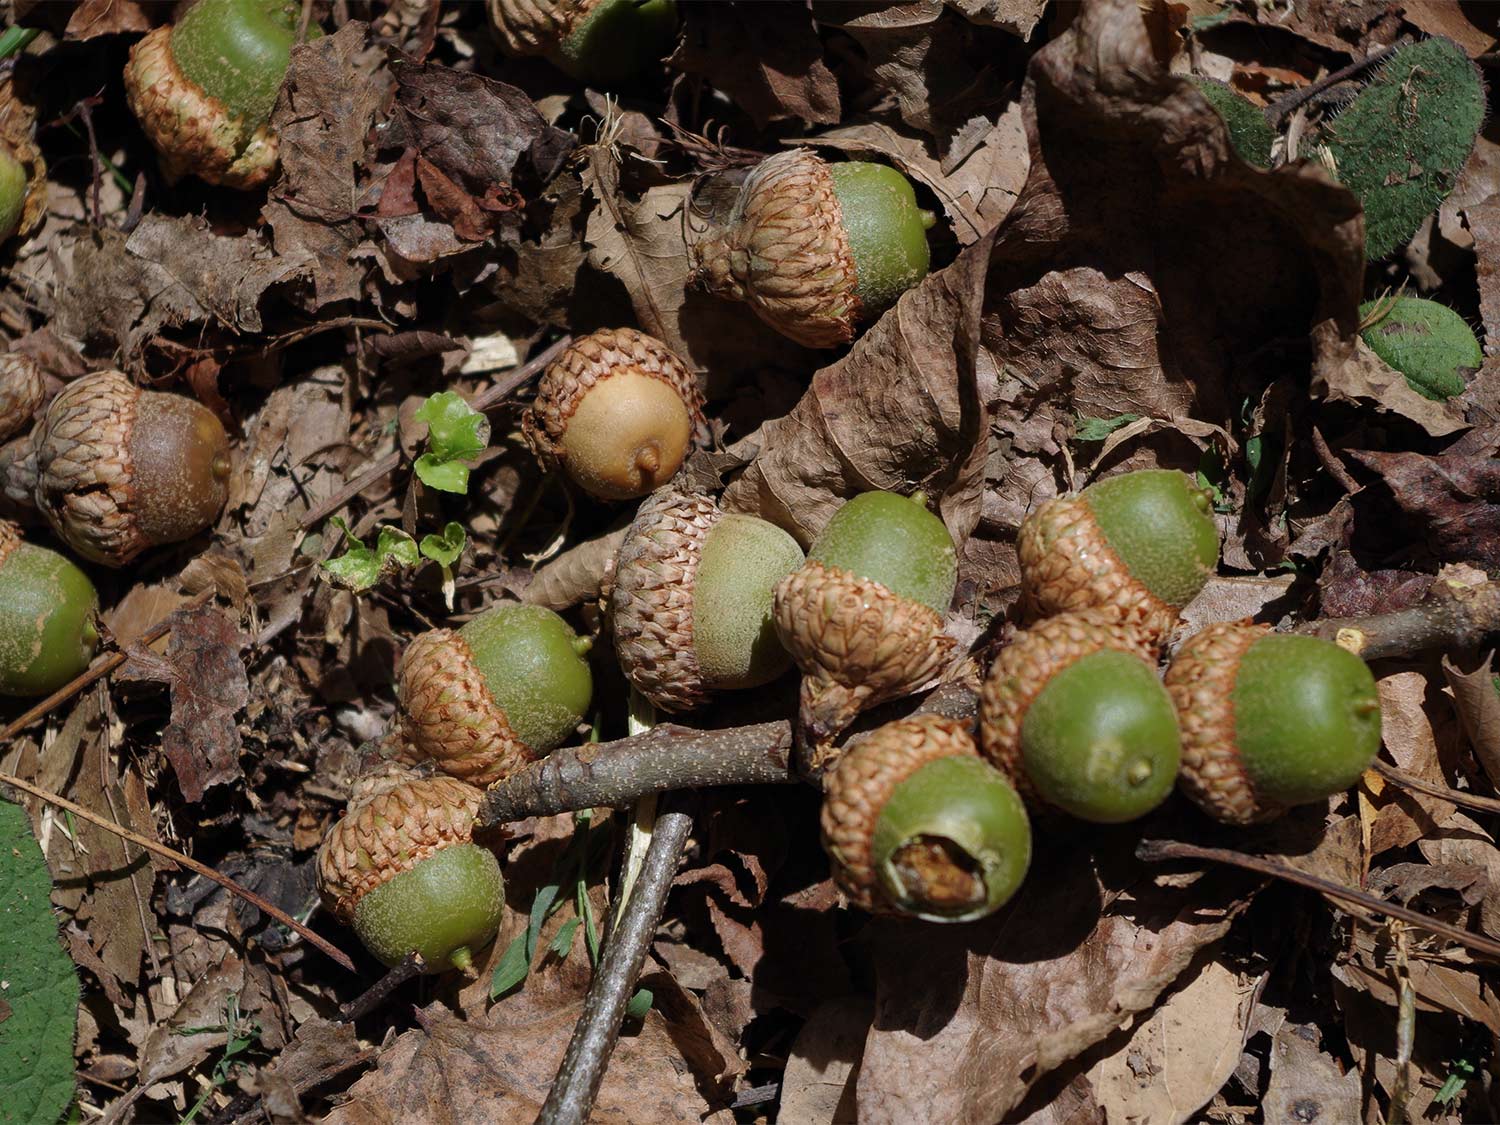 A pile of green acorns on a leafy ground.